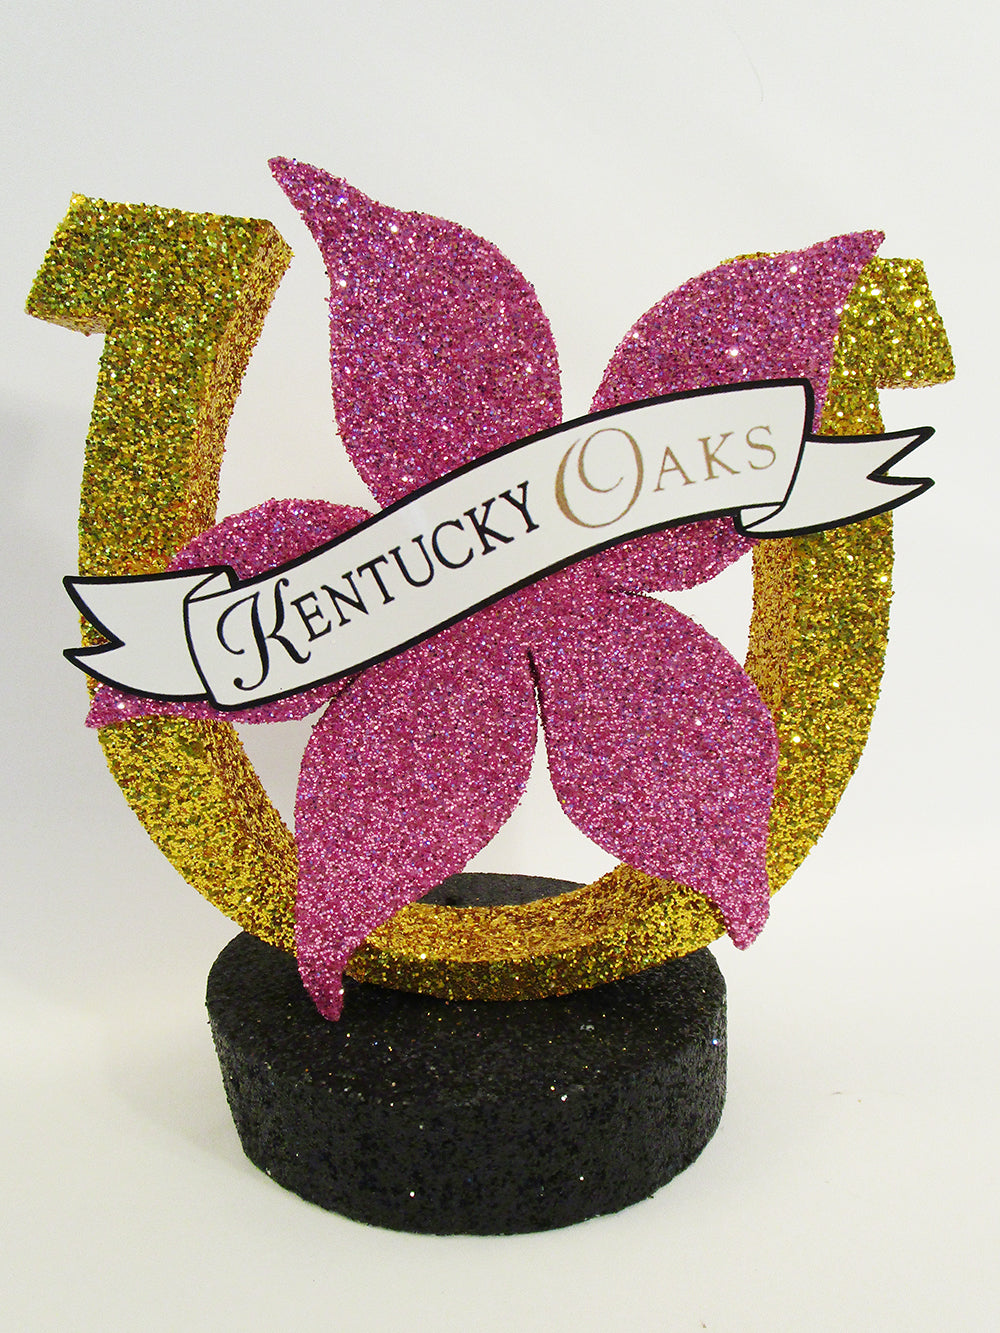 Kentucky Derby themed centerpiece by Designs by Ginny